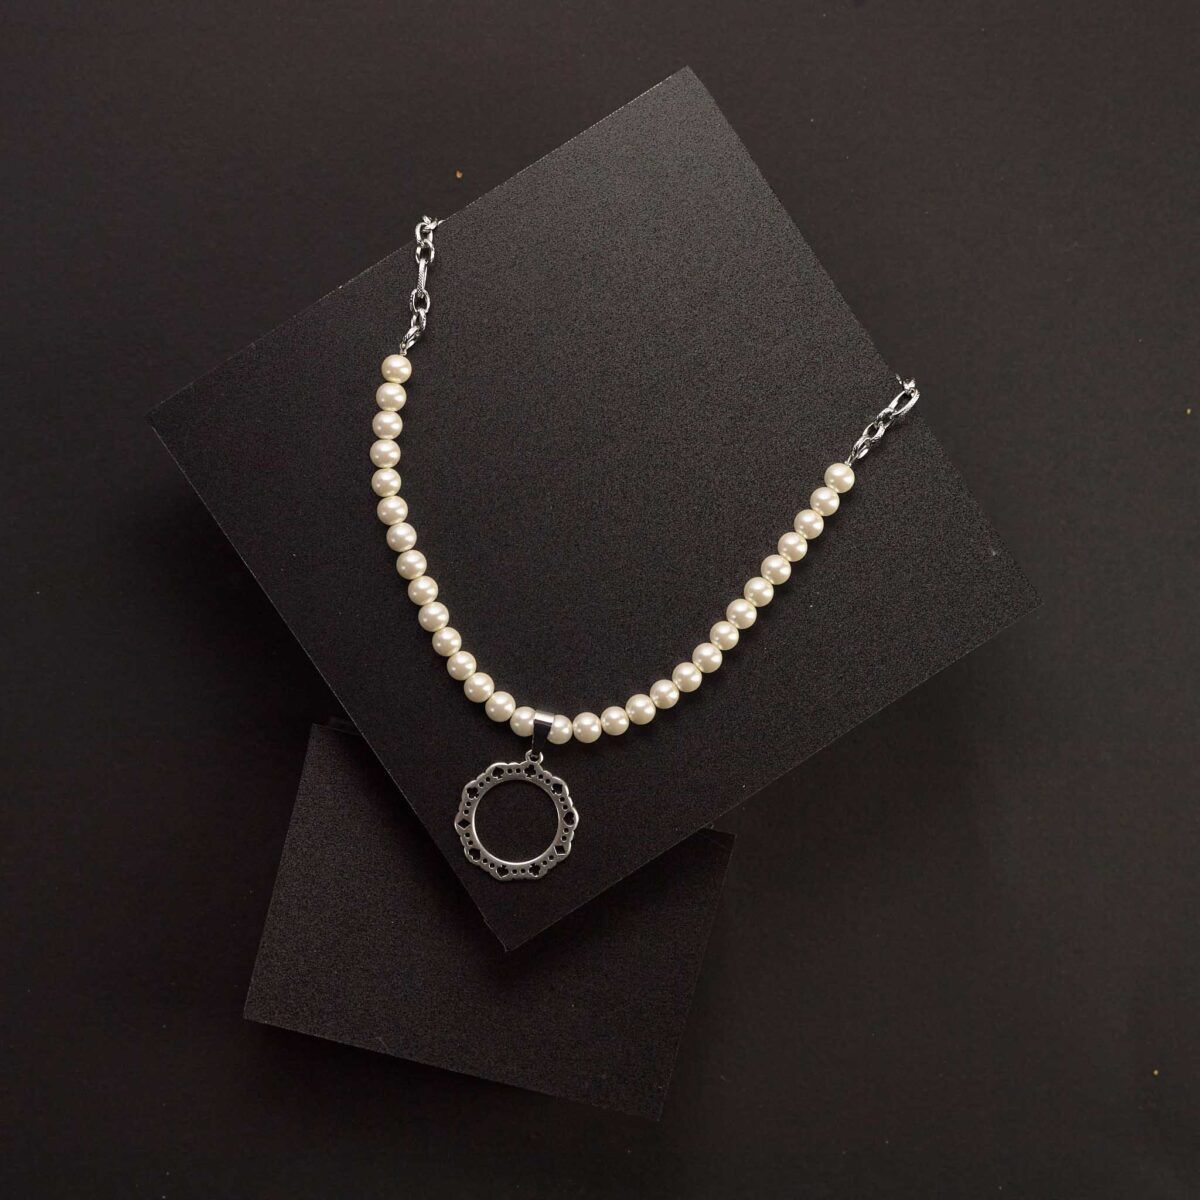 Necklace With White Pearls And Round Metallic Motif